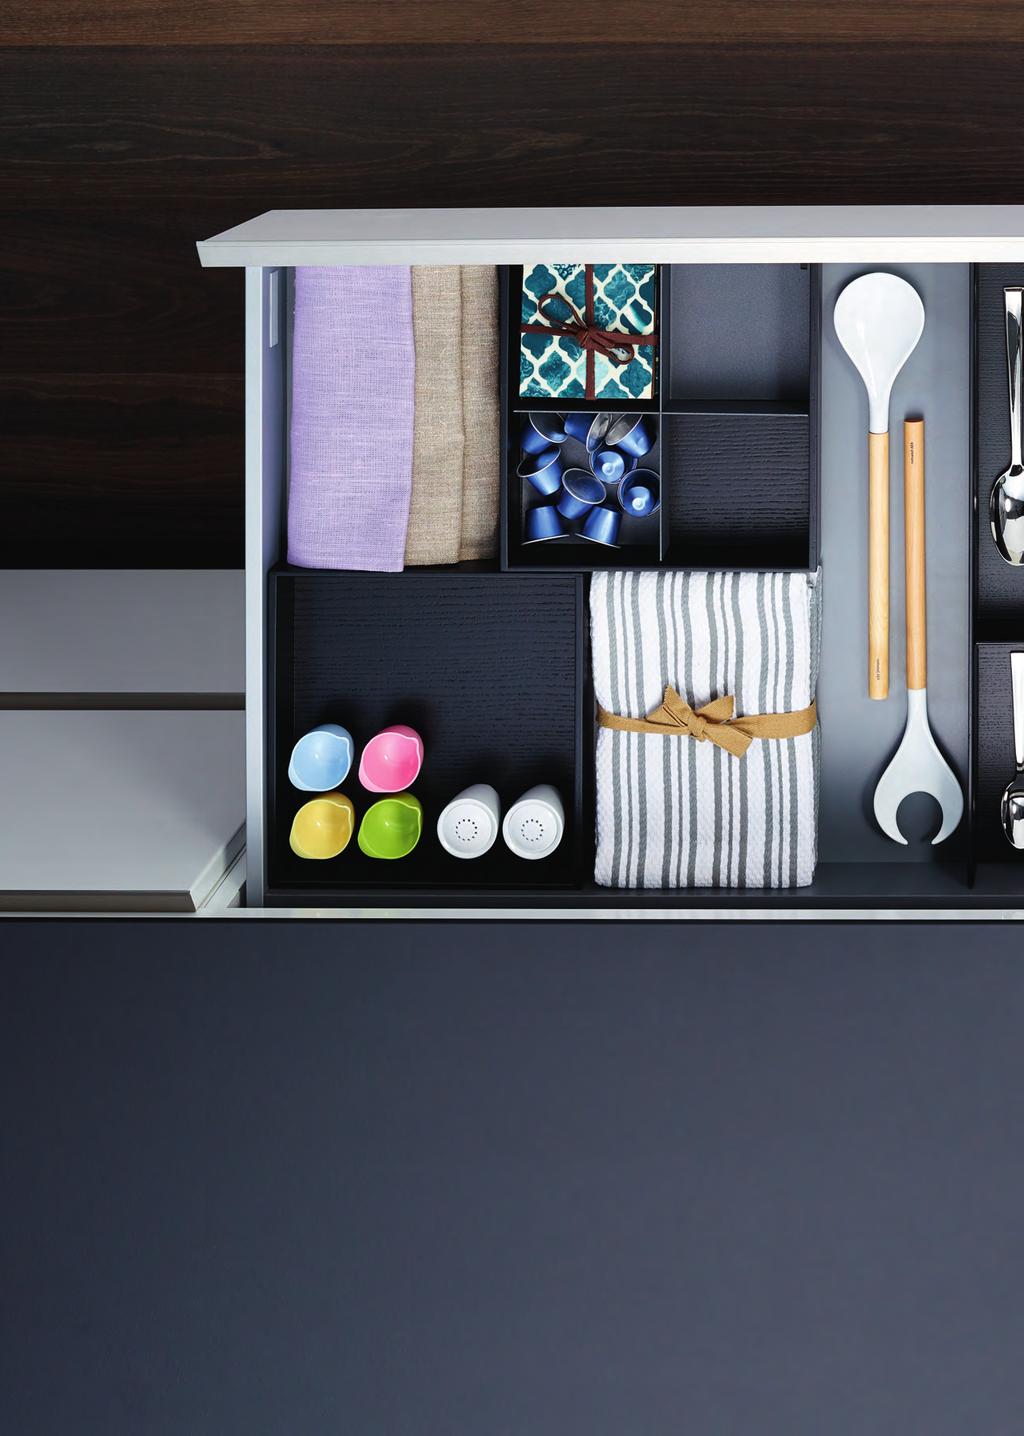 OH ORGANI- ZATION! Minimalist elegant with a hint of luxury. Organization meets lifestyle. No mess and confusion; instead elements are positioned neatly side by side.